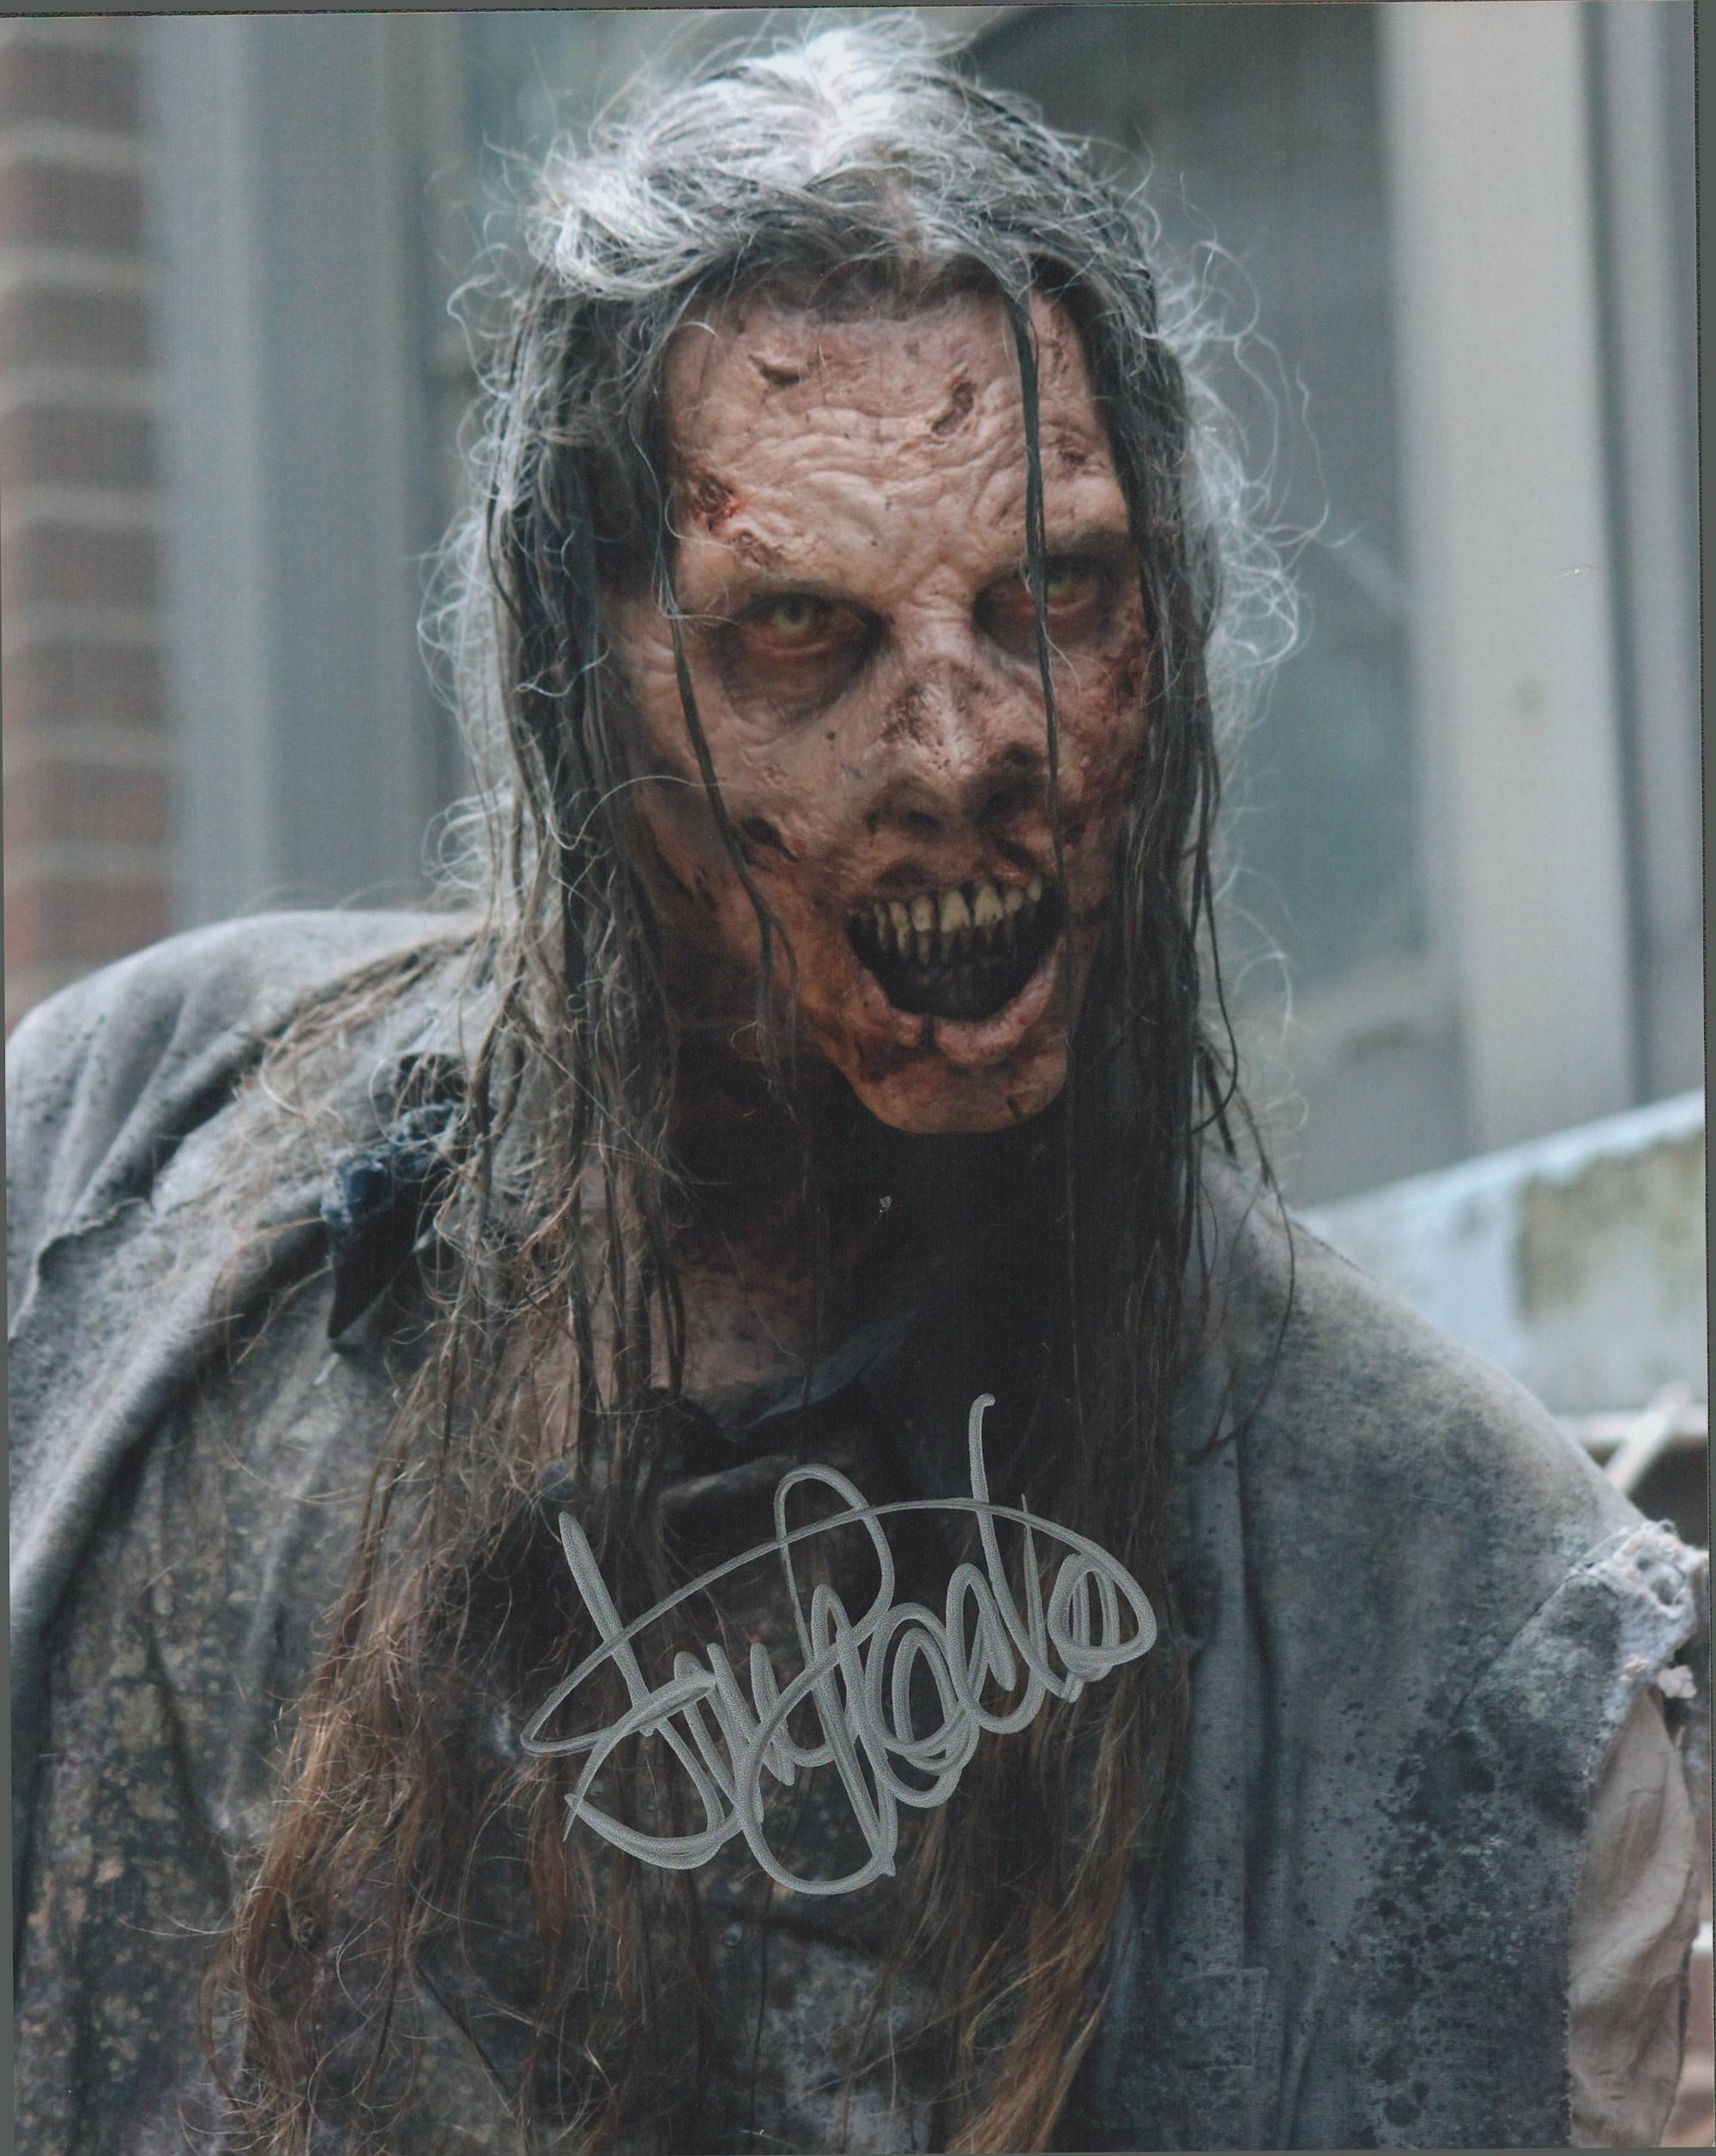 Walking Dead Star, Tim Proctor signed 10x8 colour photograph pictured as a walker on Season 5 in